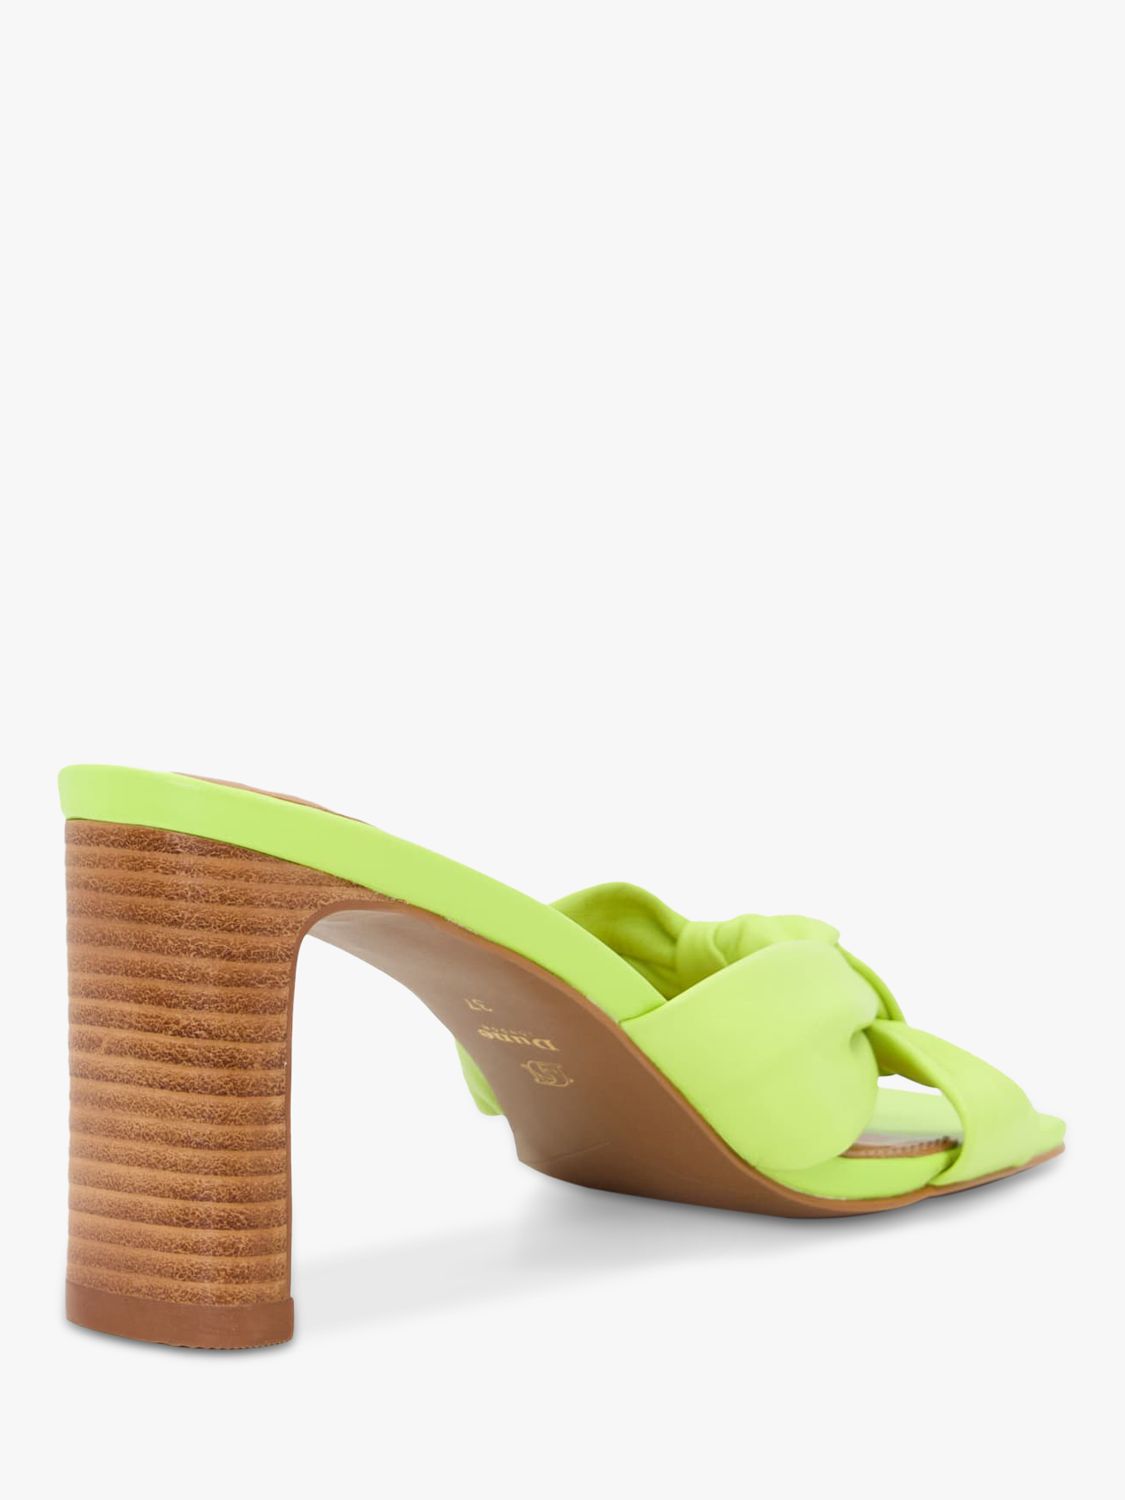 Dune Maize Leather Mules, Lime Green-leather at John Lewis & Partners